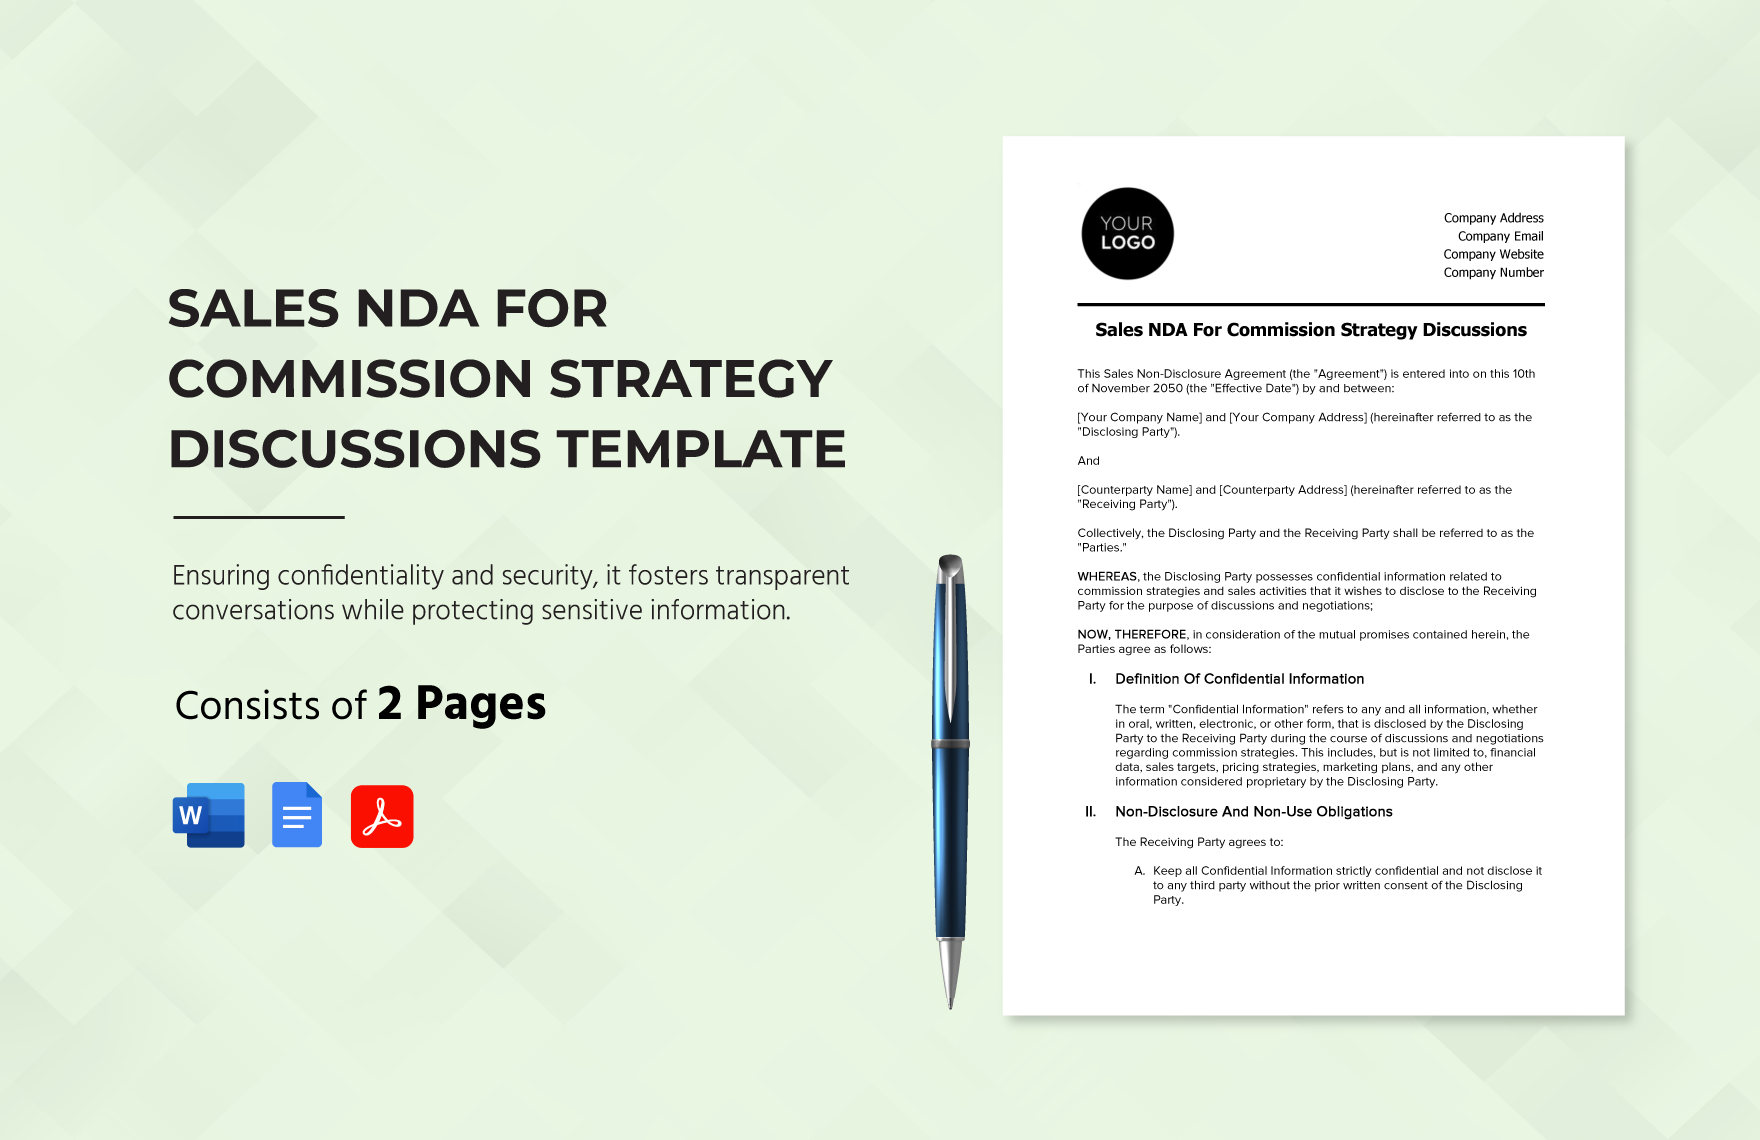 Sales NDA for Commission Strategy Discussions Template